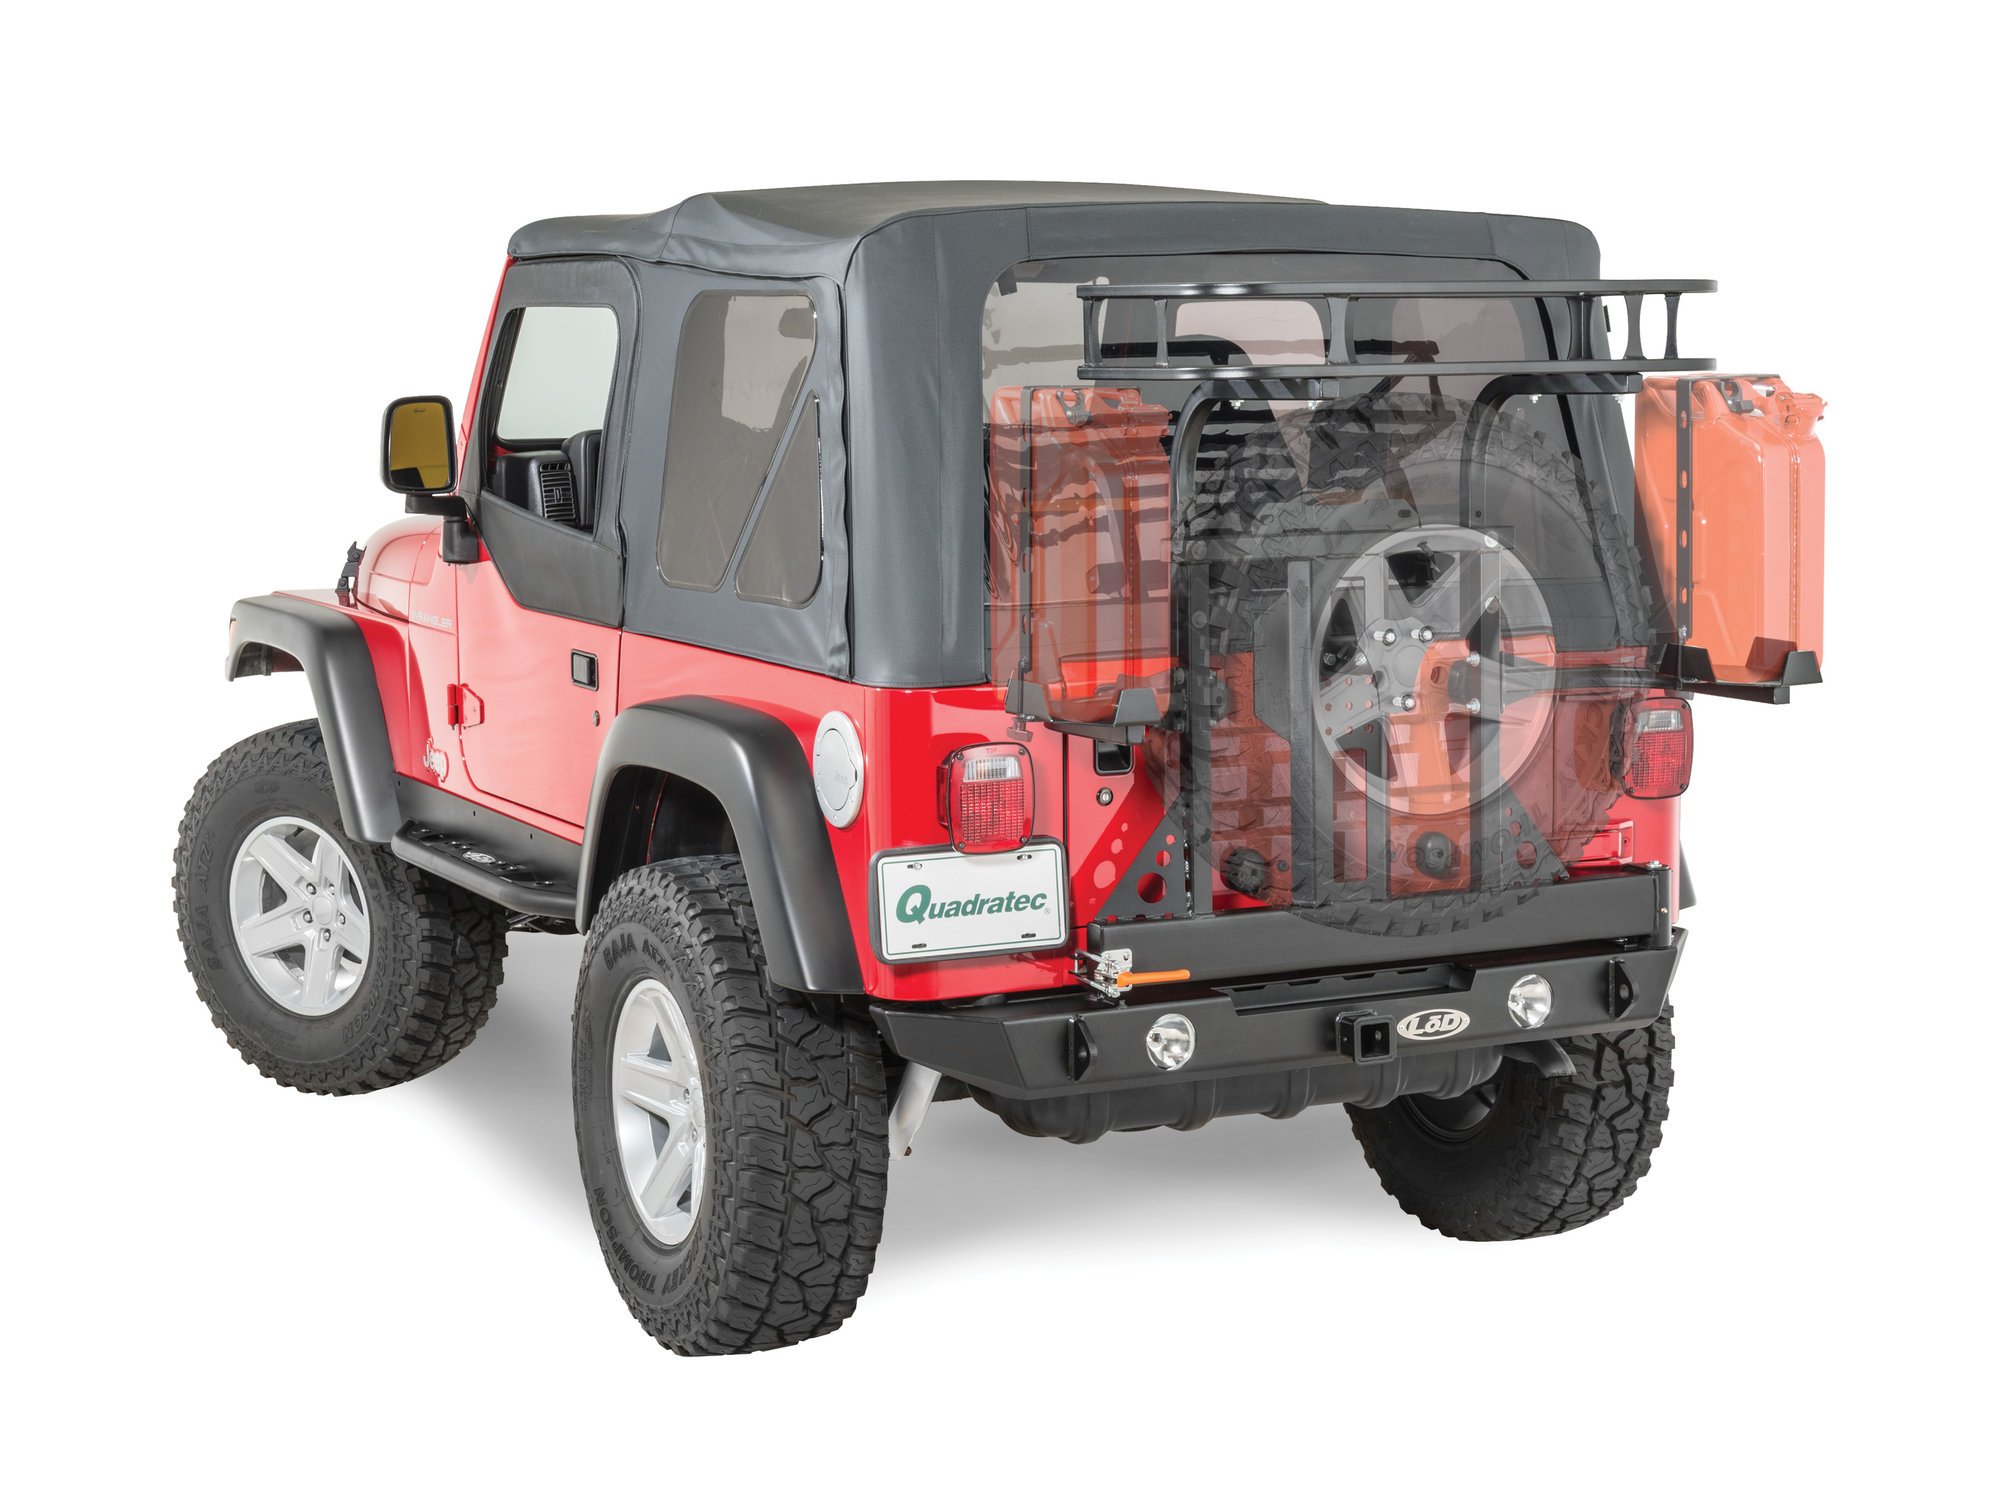 LoD JTK9601 Signature Series Trail Rack for 97-06 Jeep Wrangler TJ with LoD  Signature Series Rear Bumper and Tire Carrier | Quadratec